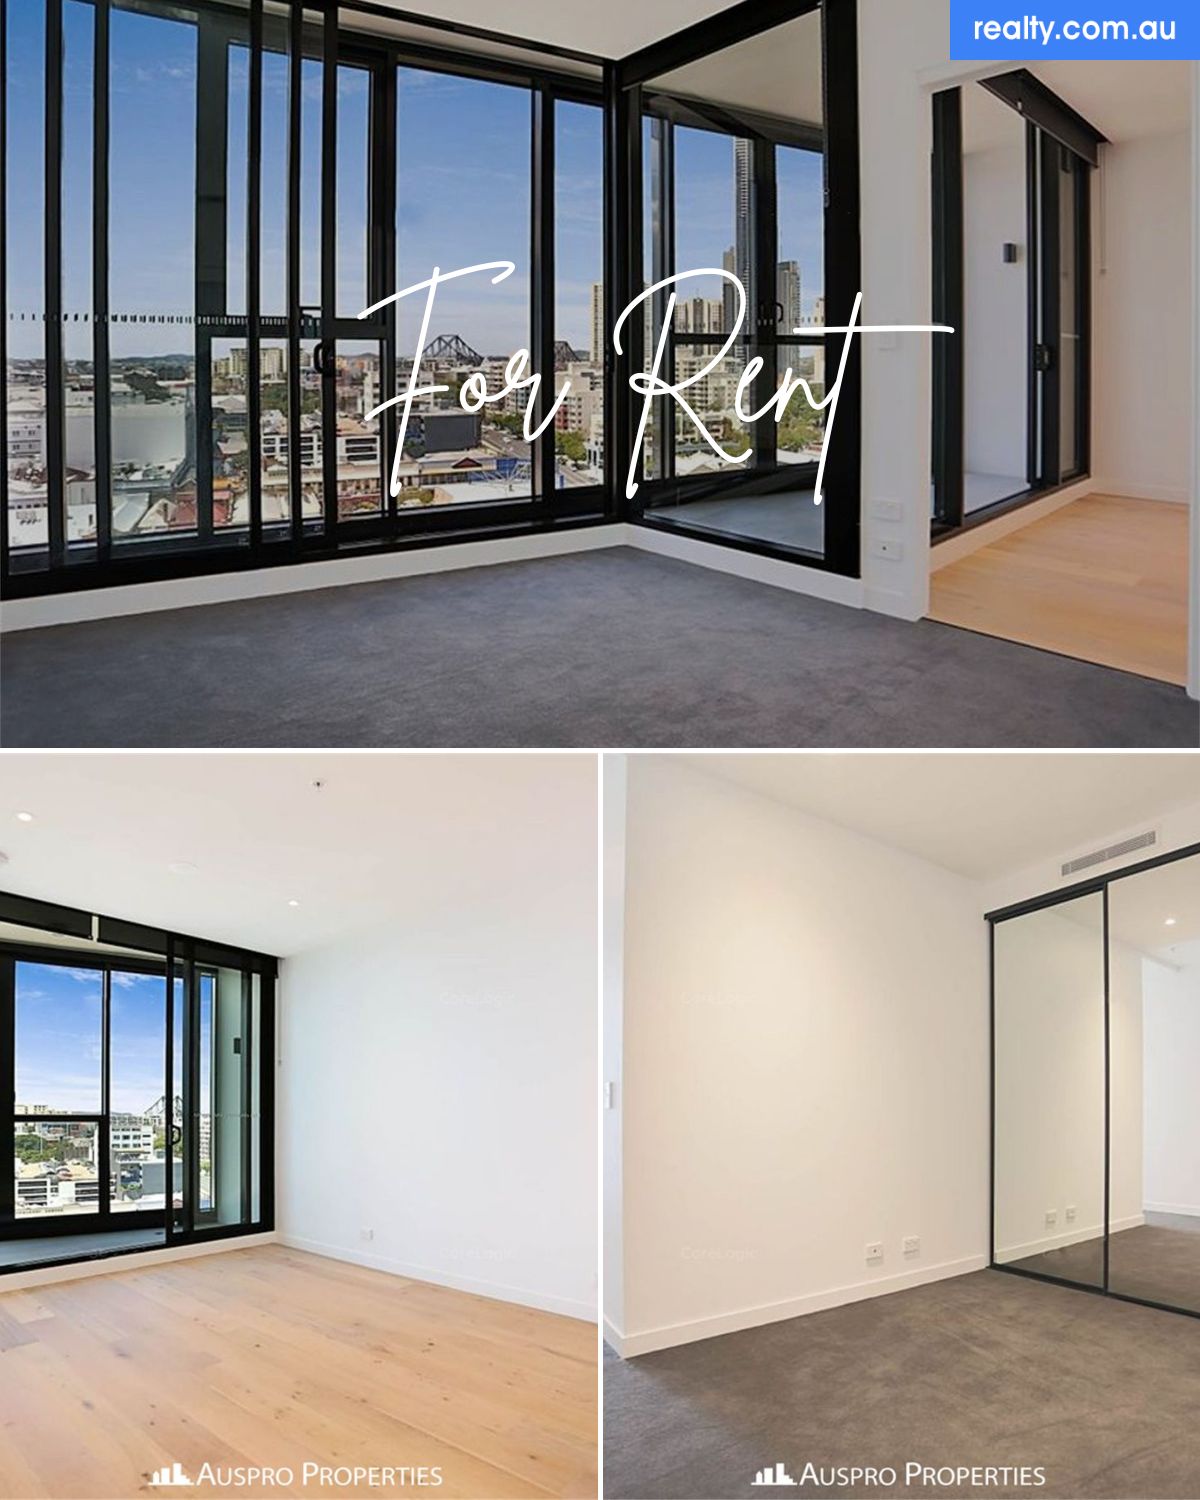 2405/179 Alfred Street, Fortitude Valley, QLD 4006 | Realty.com.au